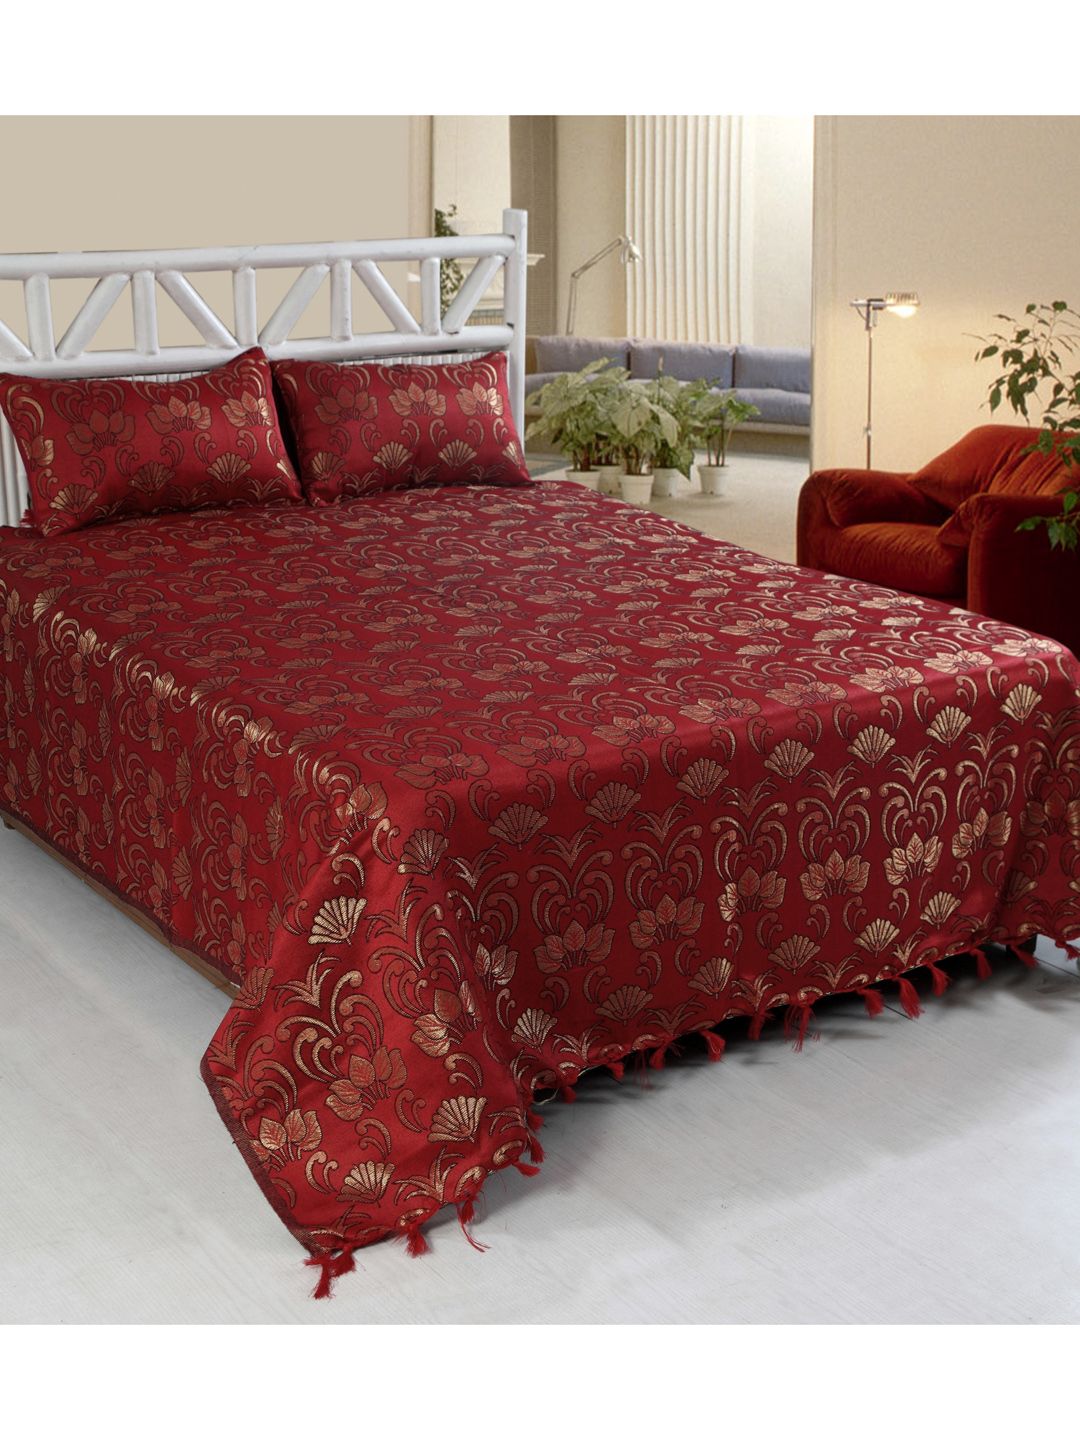 Varde Maroon & Beige Woven-Design Jacquard Double Bed Cover With Pillow Covers Price in India